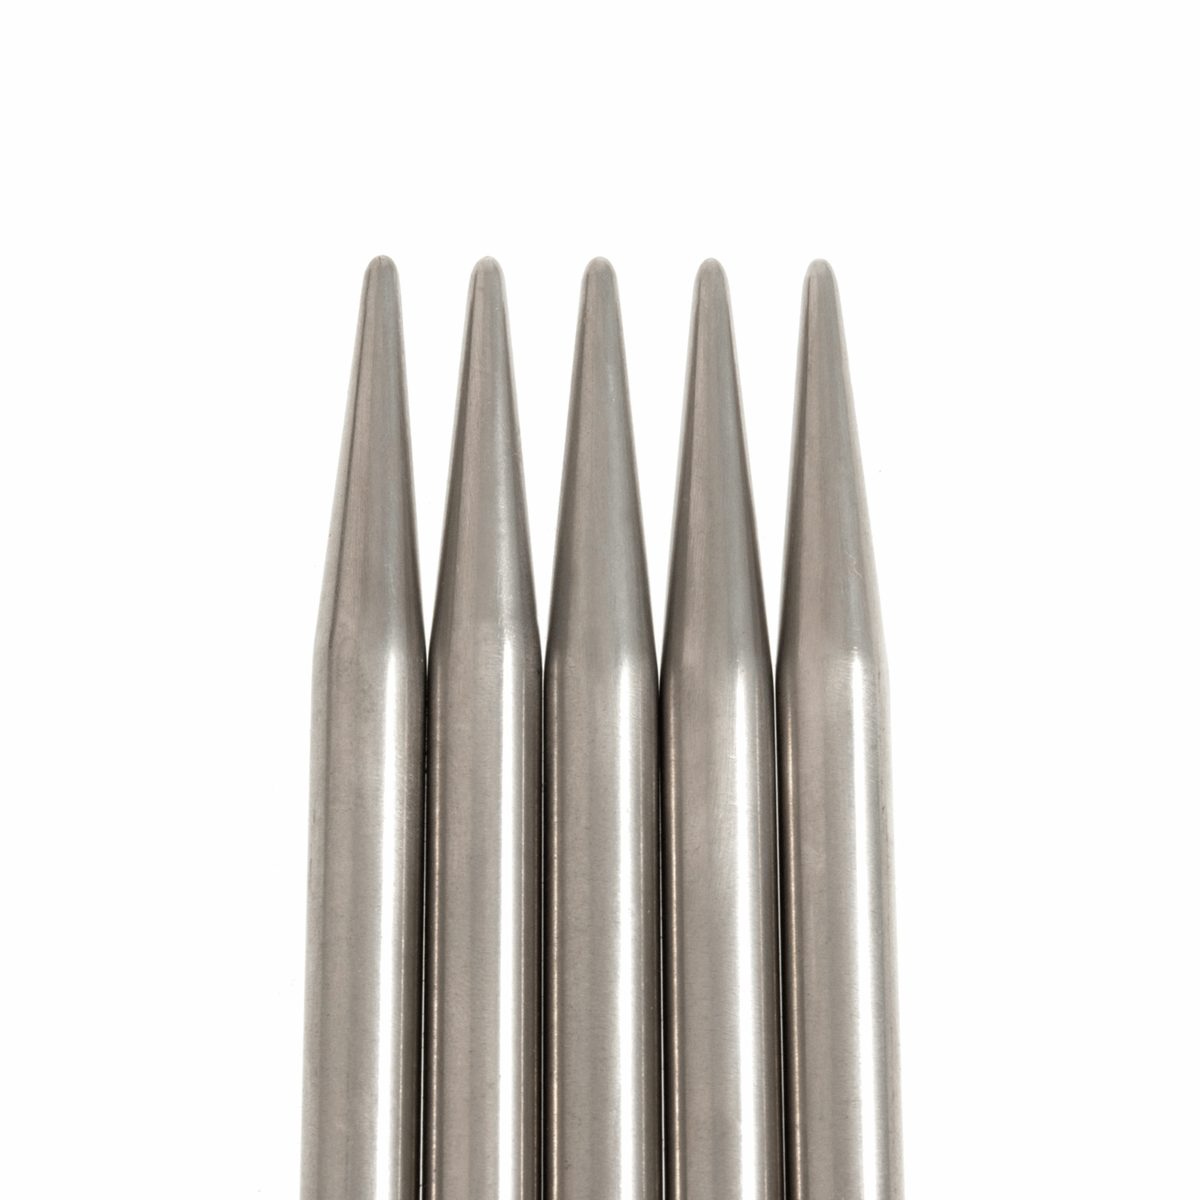 PONY 'Elan' Double-Ended Stainless Steel Knitting Pins (Set of 5) - 20cm x 8.00mm